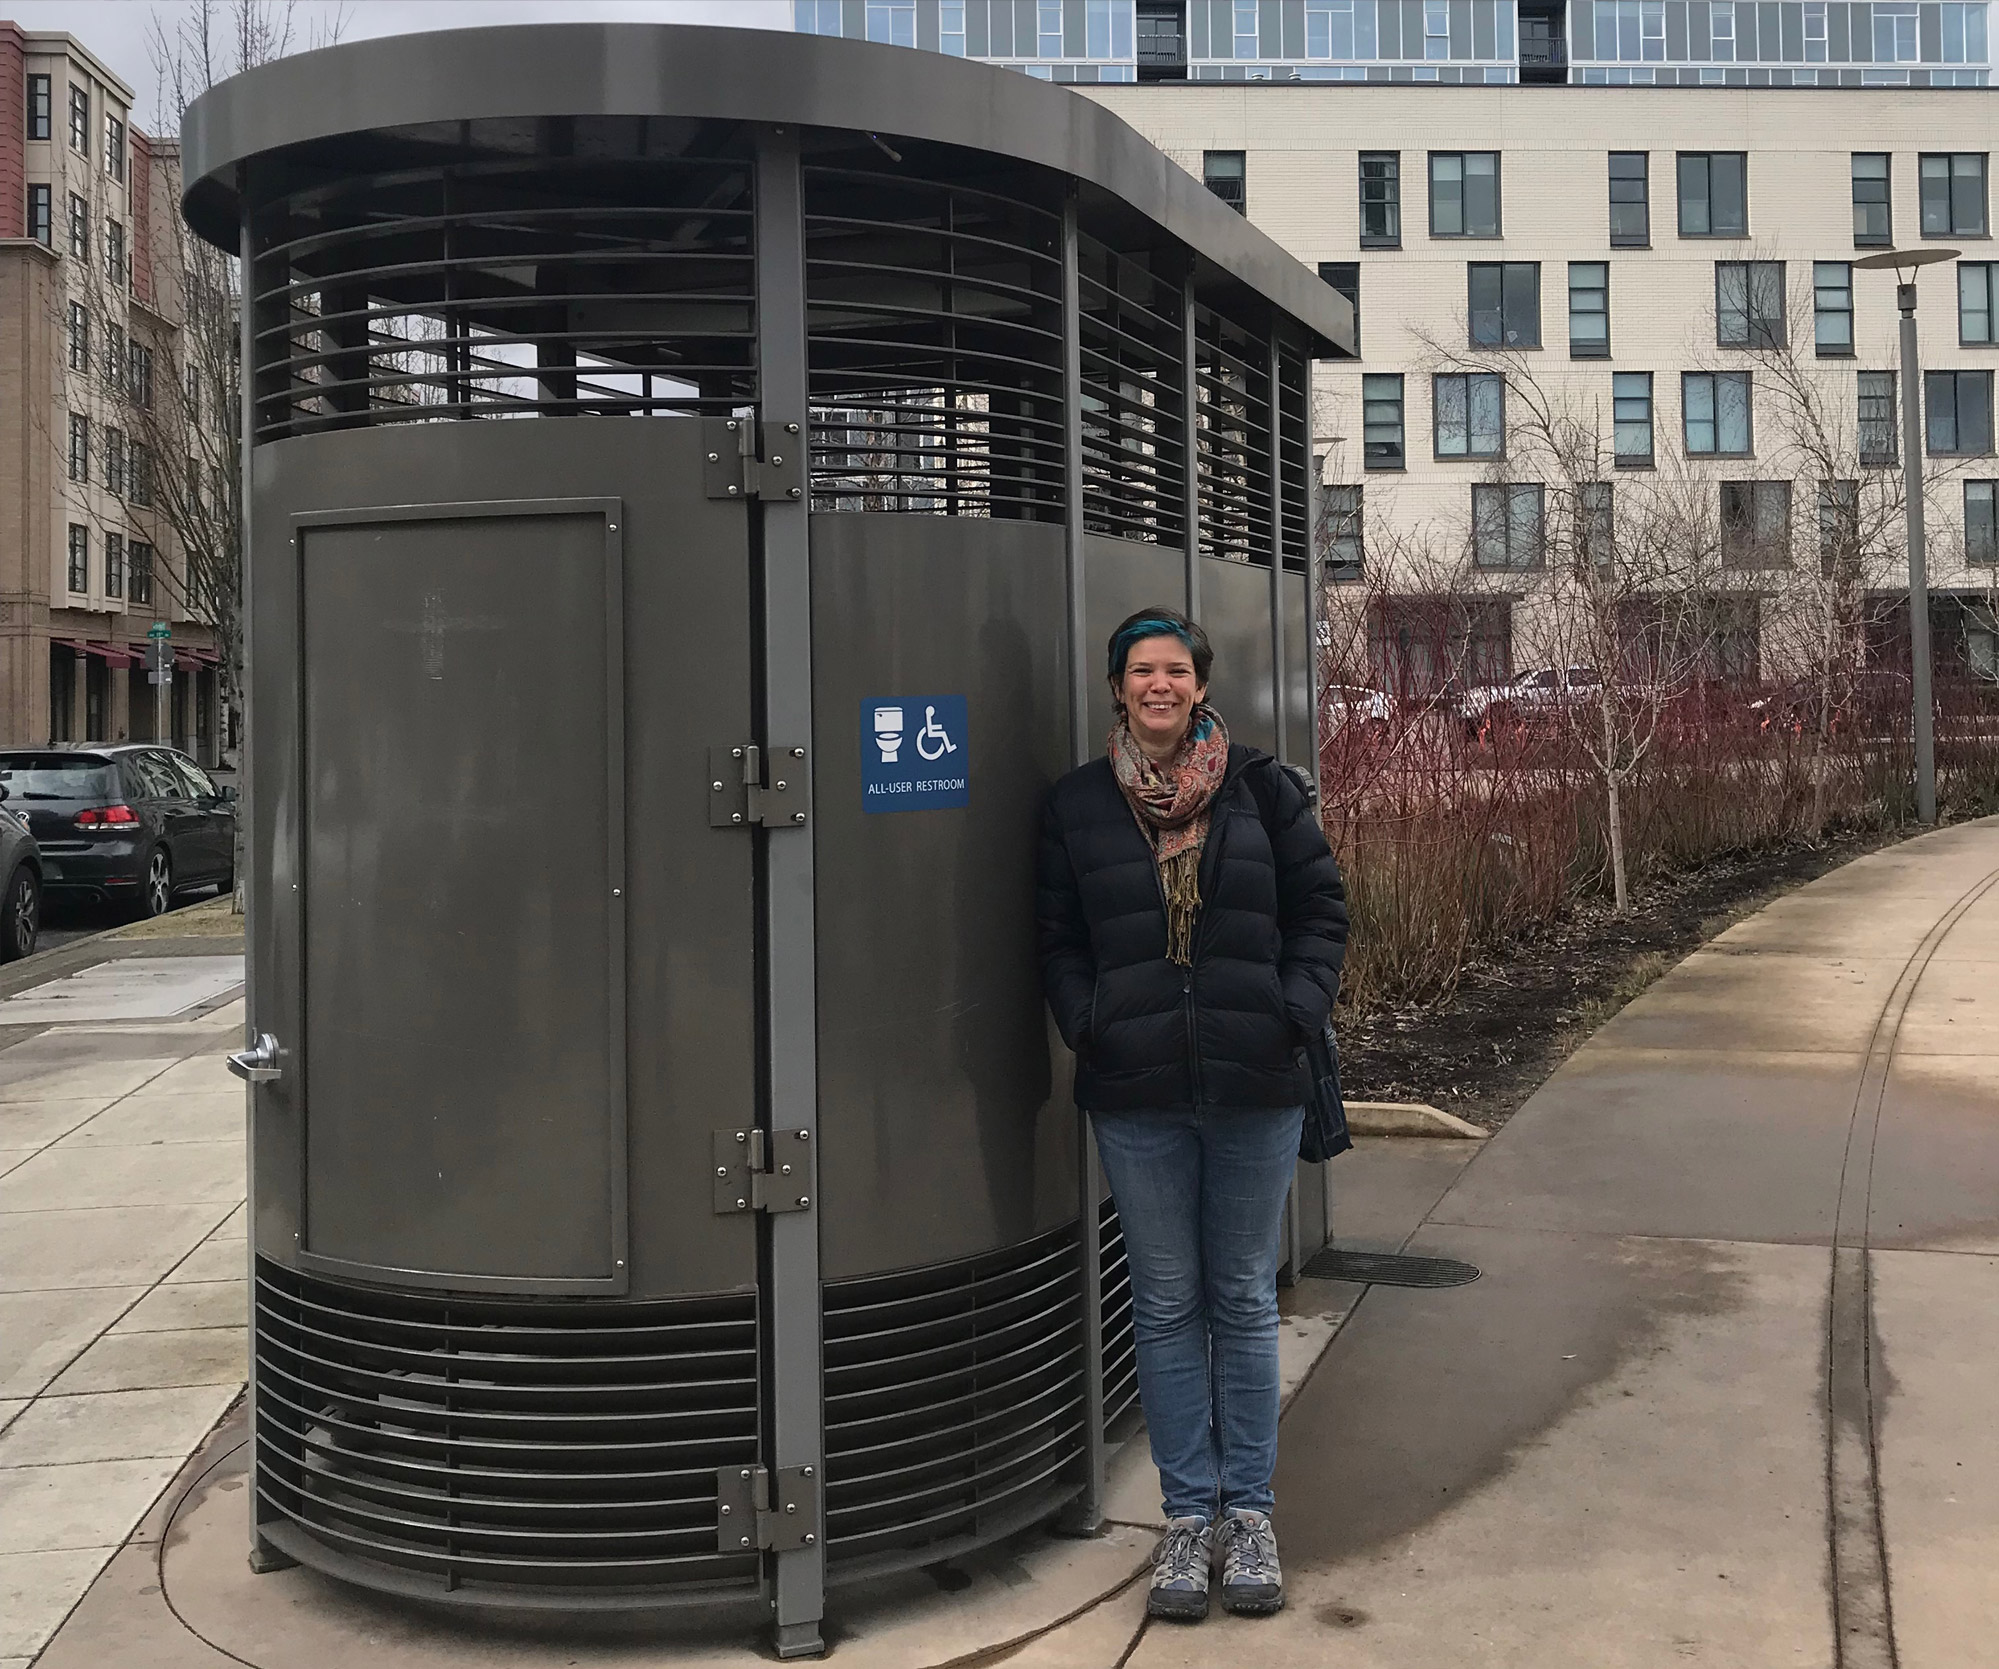 Churchill Fellow explores accessibility to public toilets and inclusion